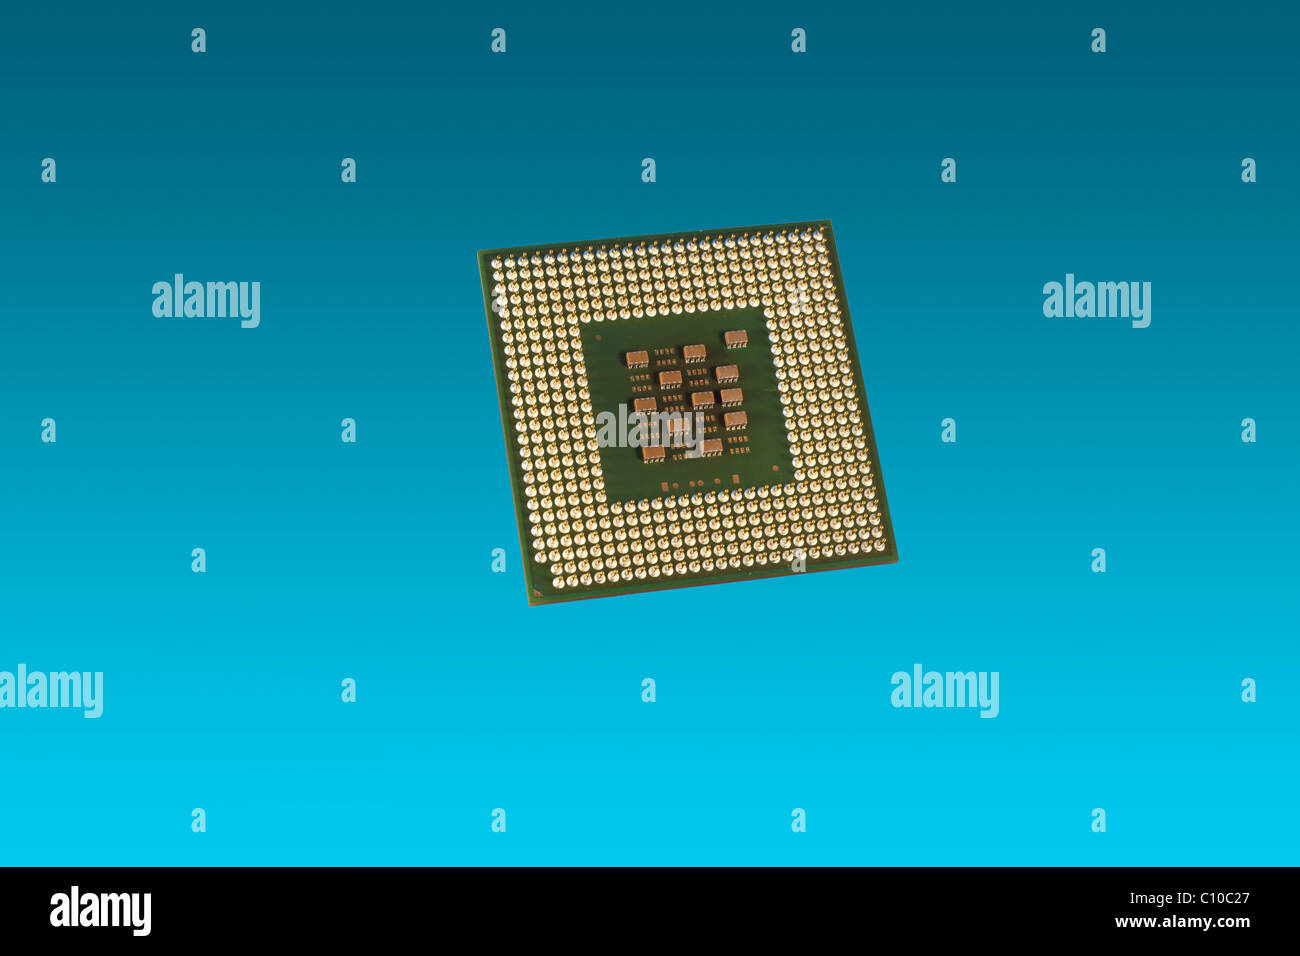 A computer Cpu on a blue background Stock Photo